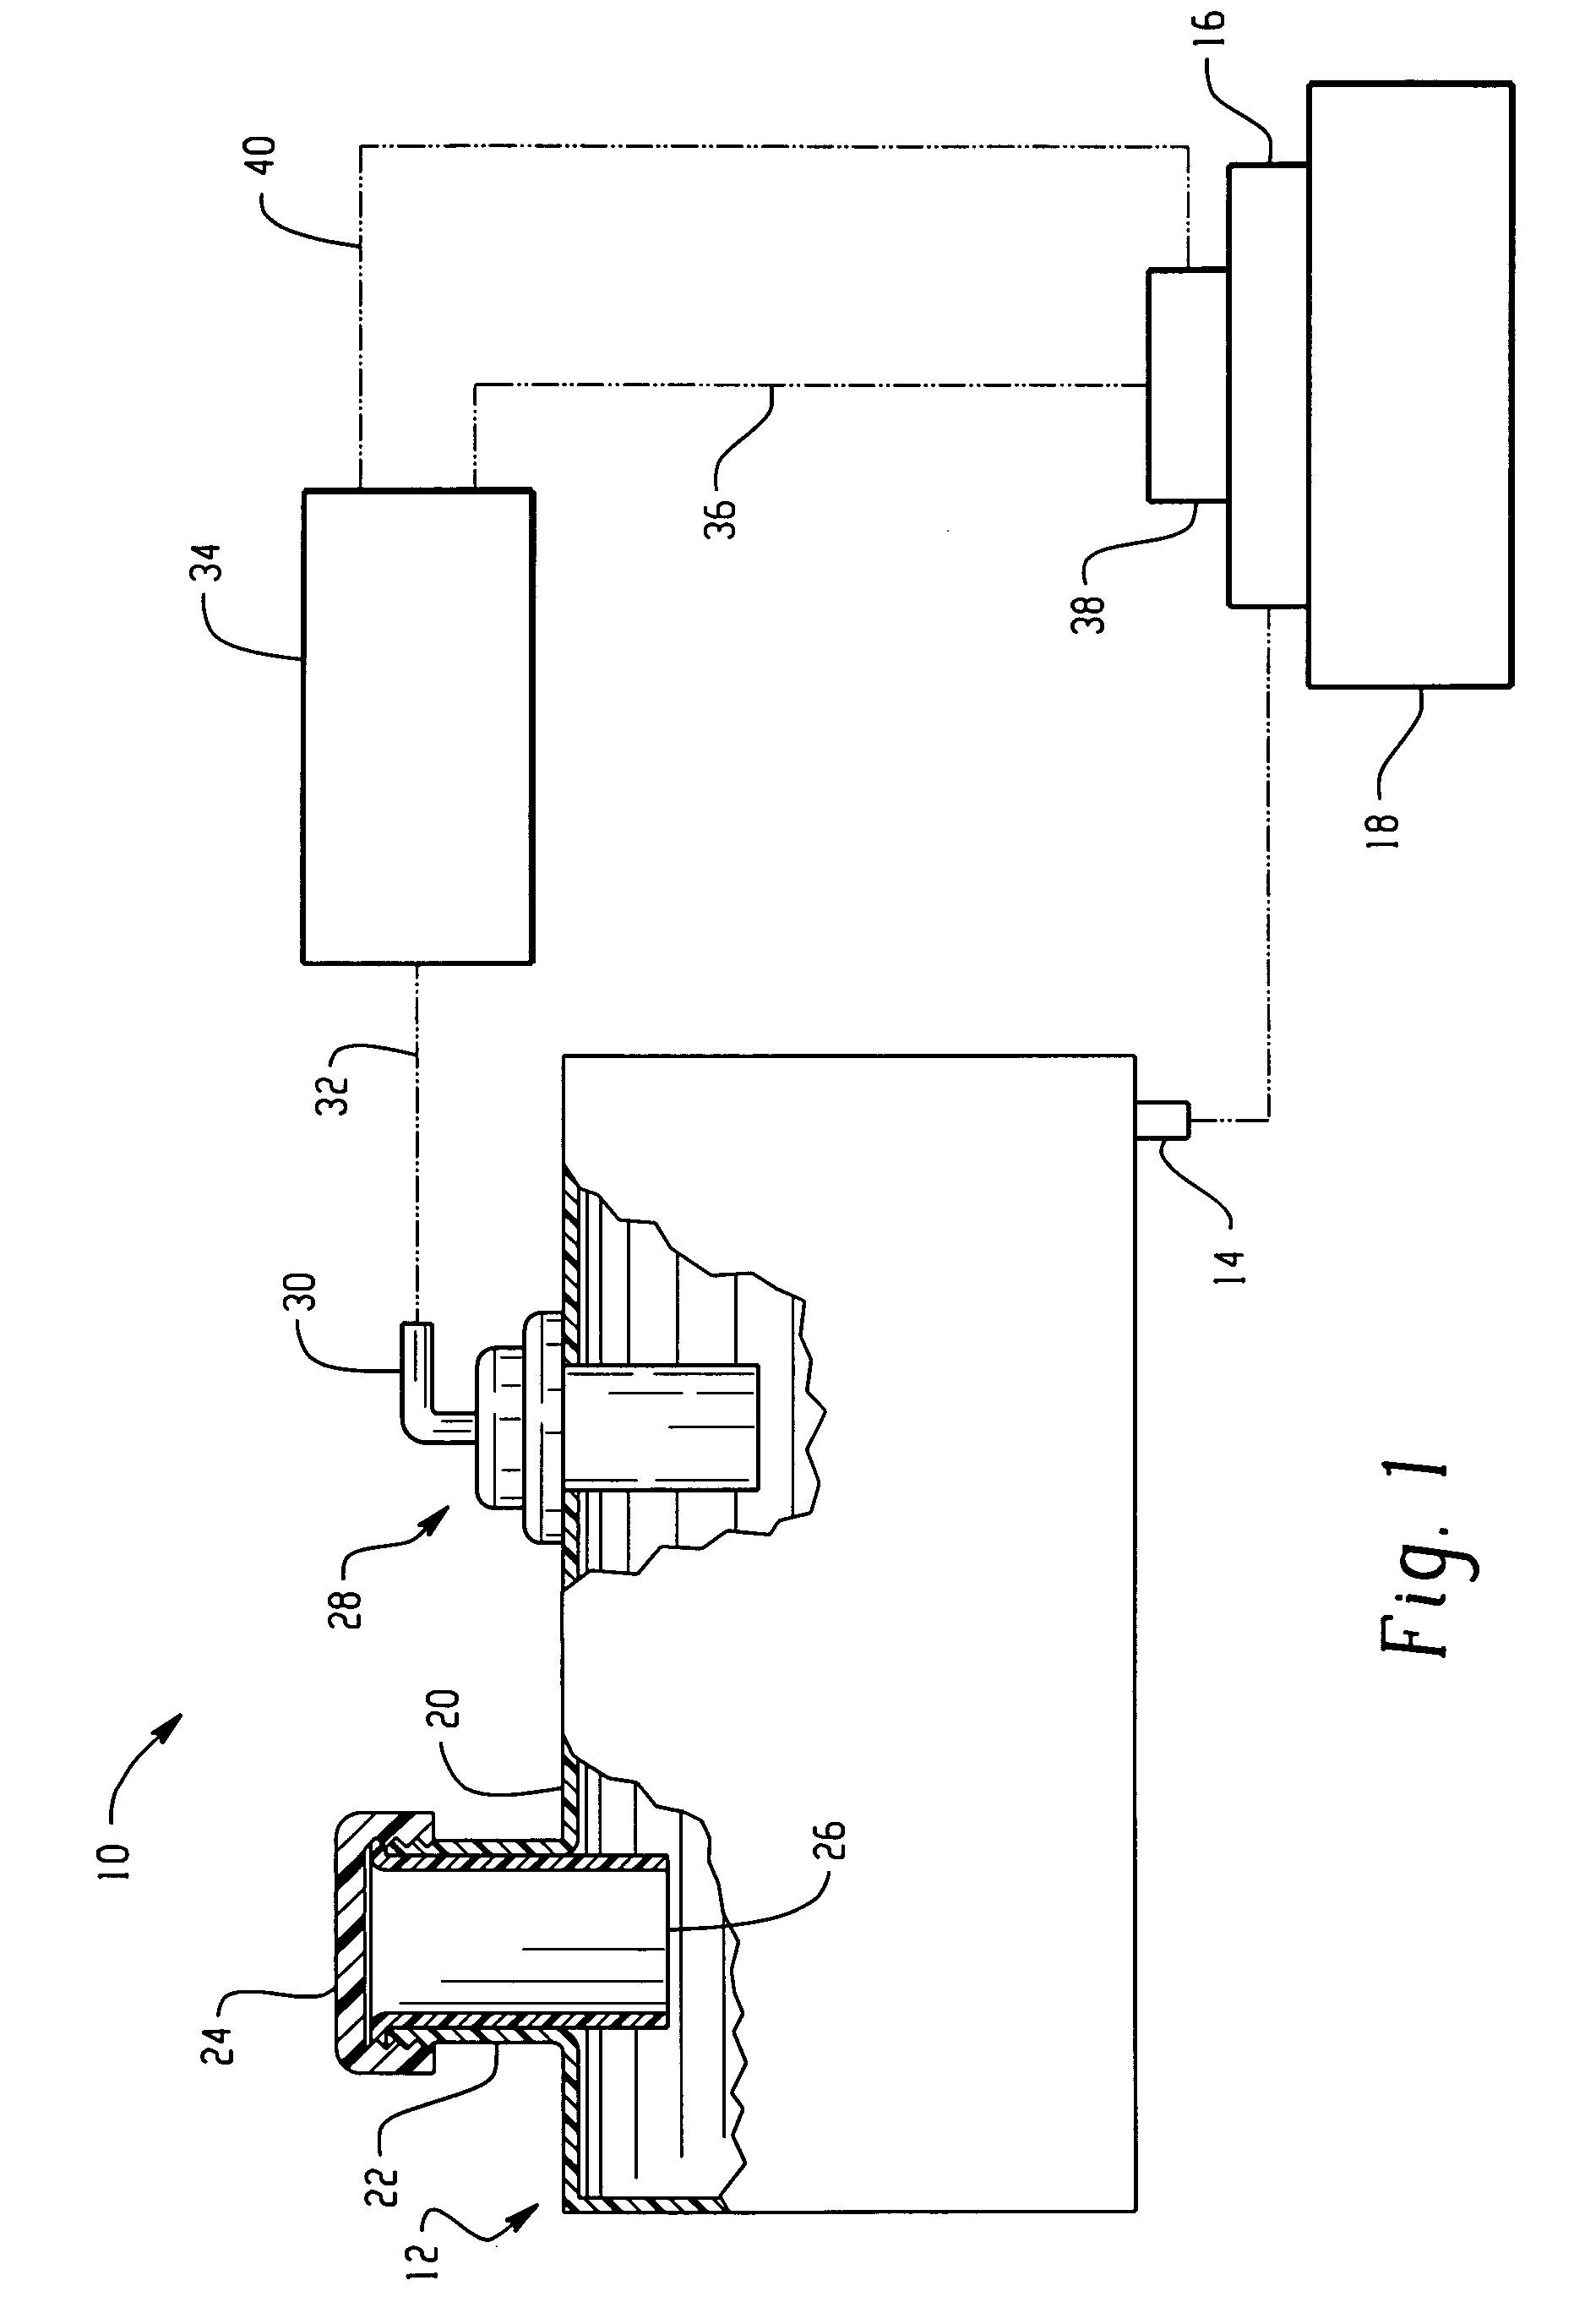 System and method for controlling fuel vapor emission in a small engine